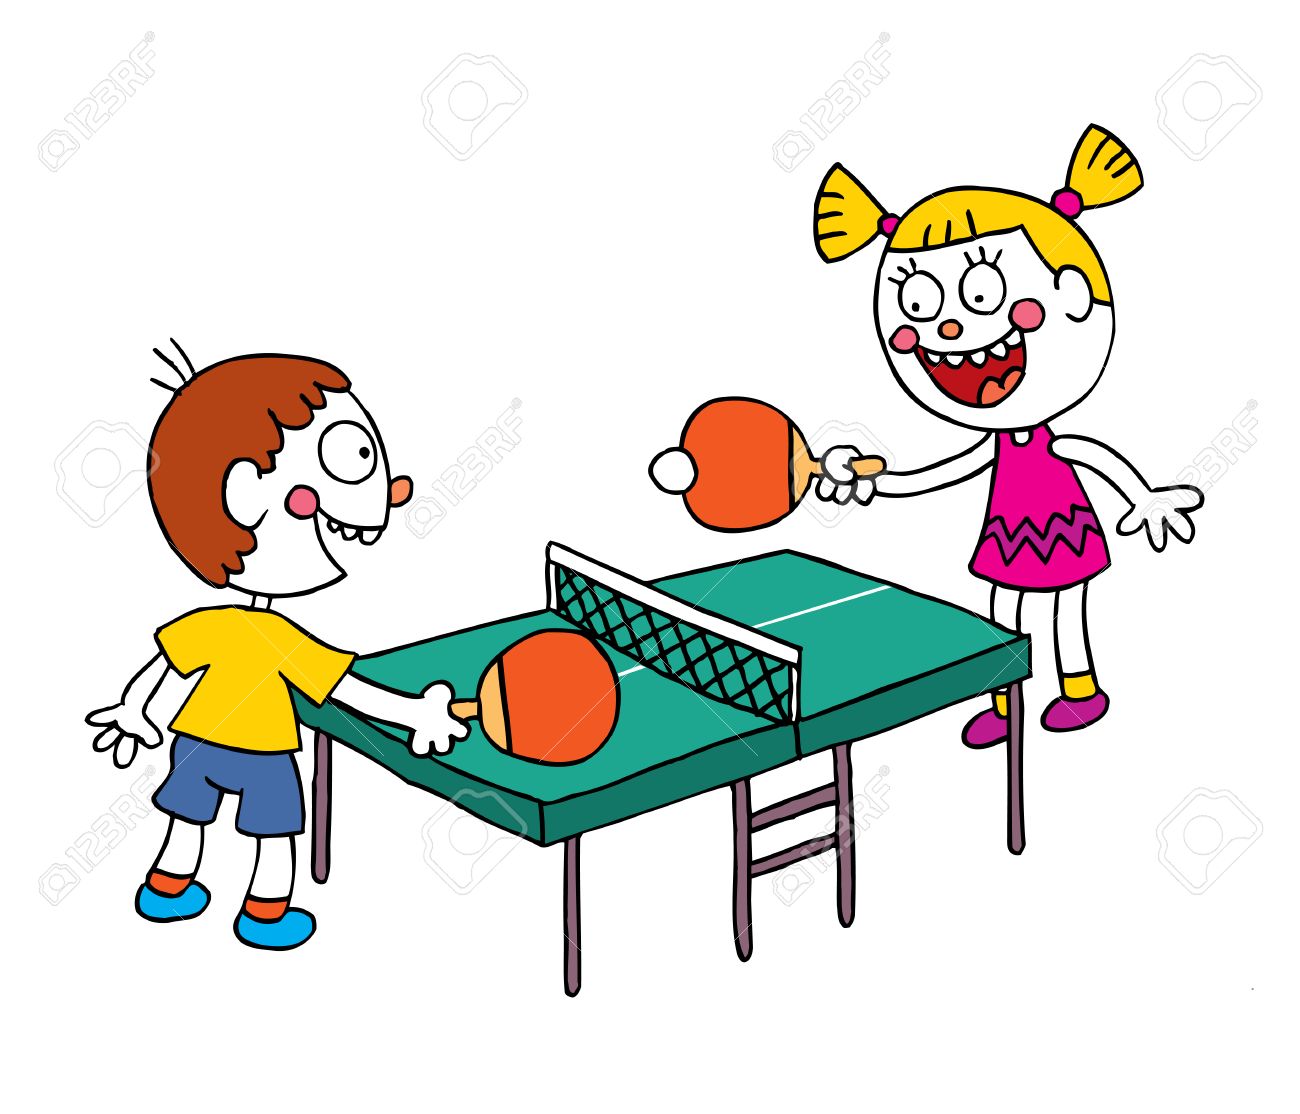 Playing table tennis.